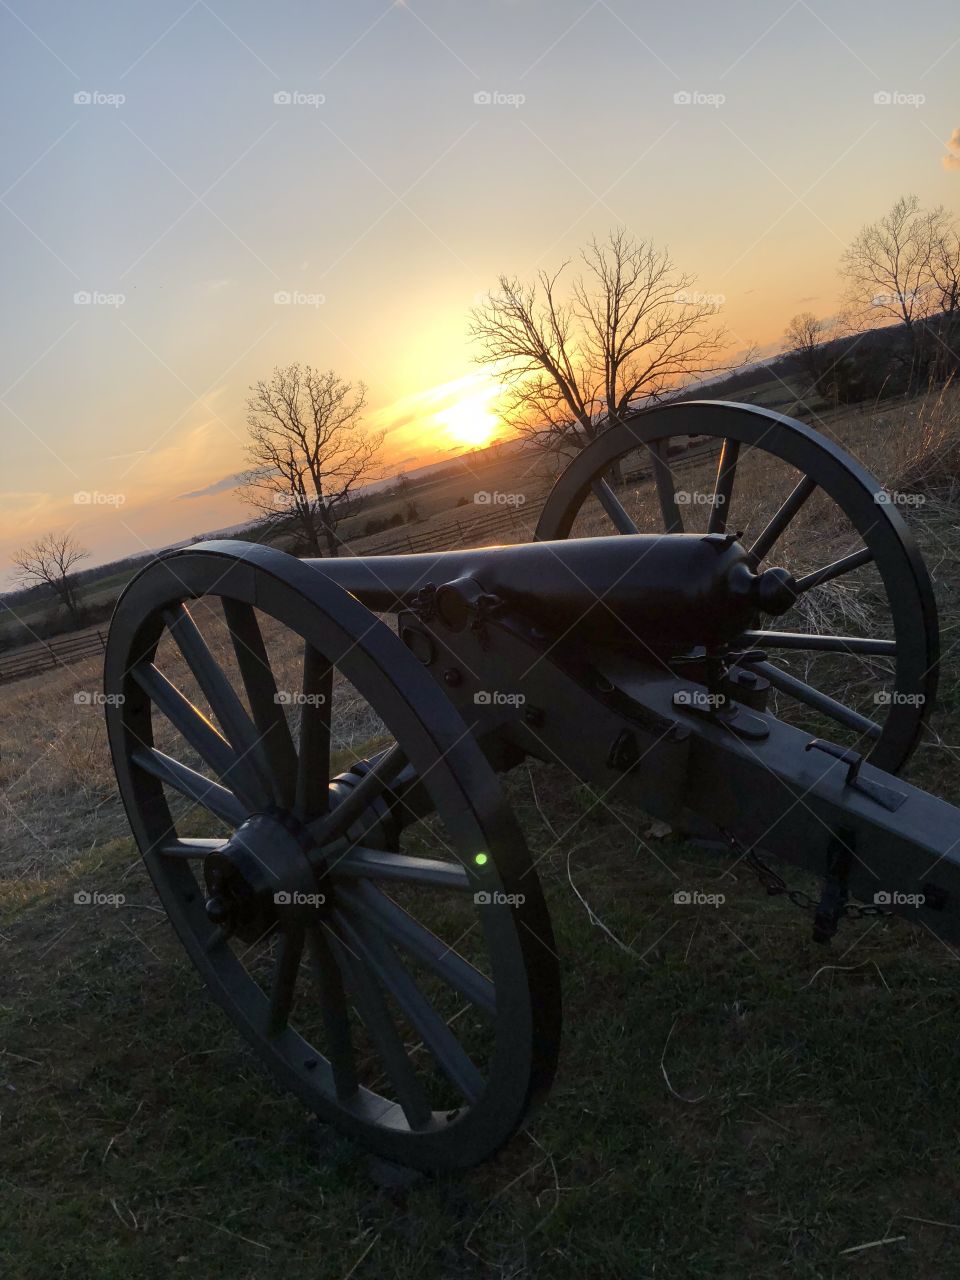 Cannon at sunset 